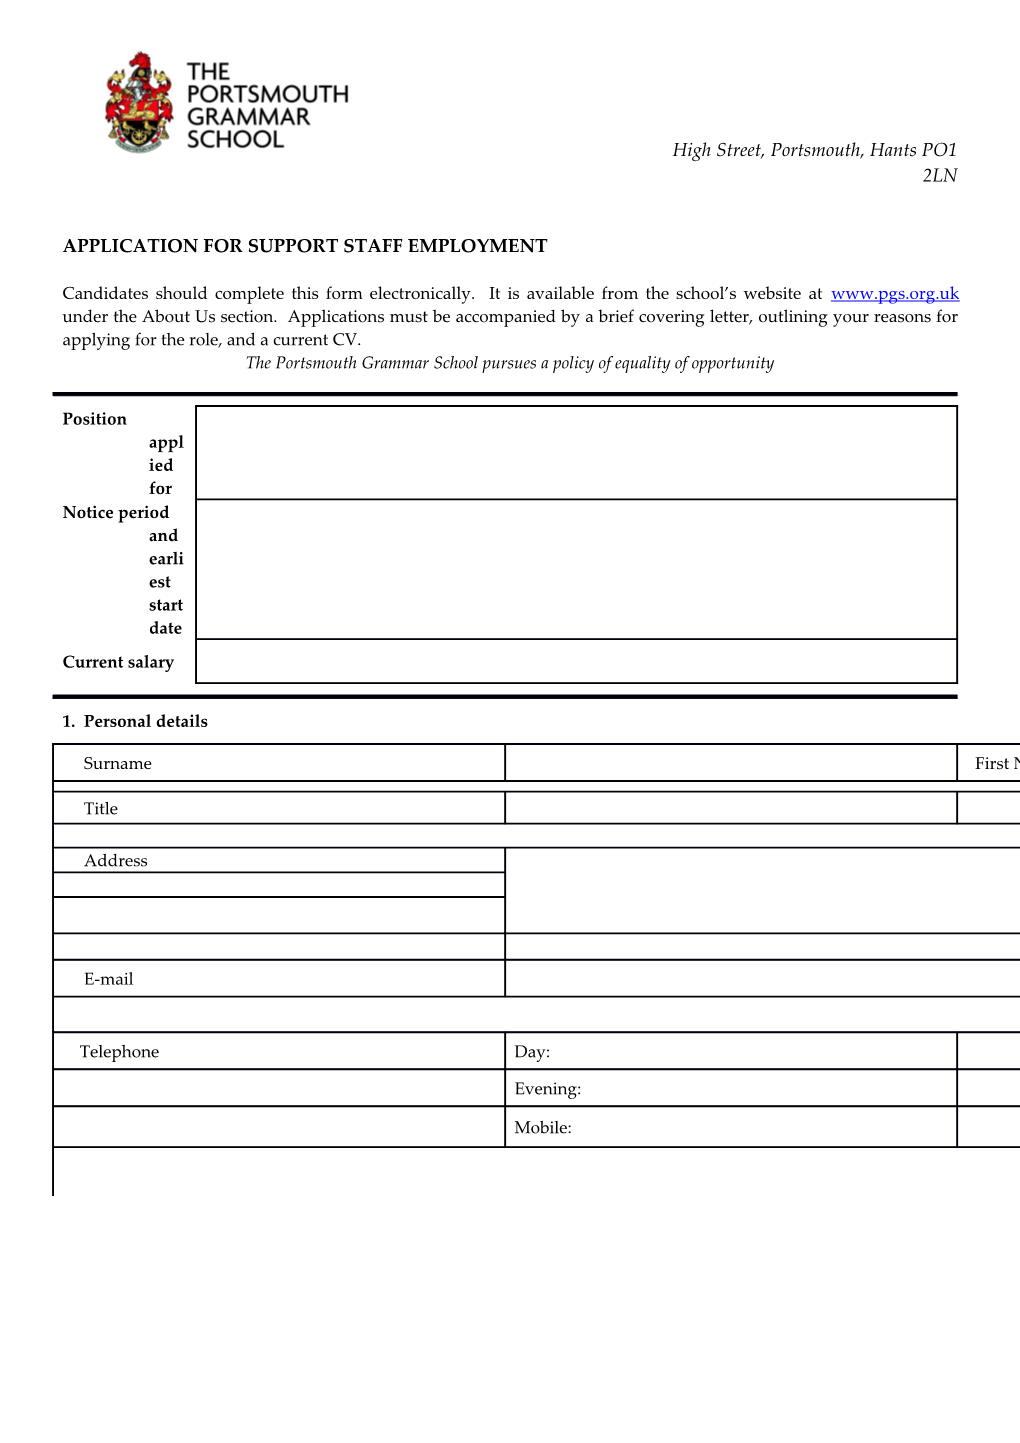 Application for Support Staff Employment